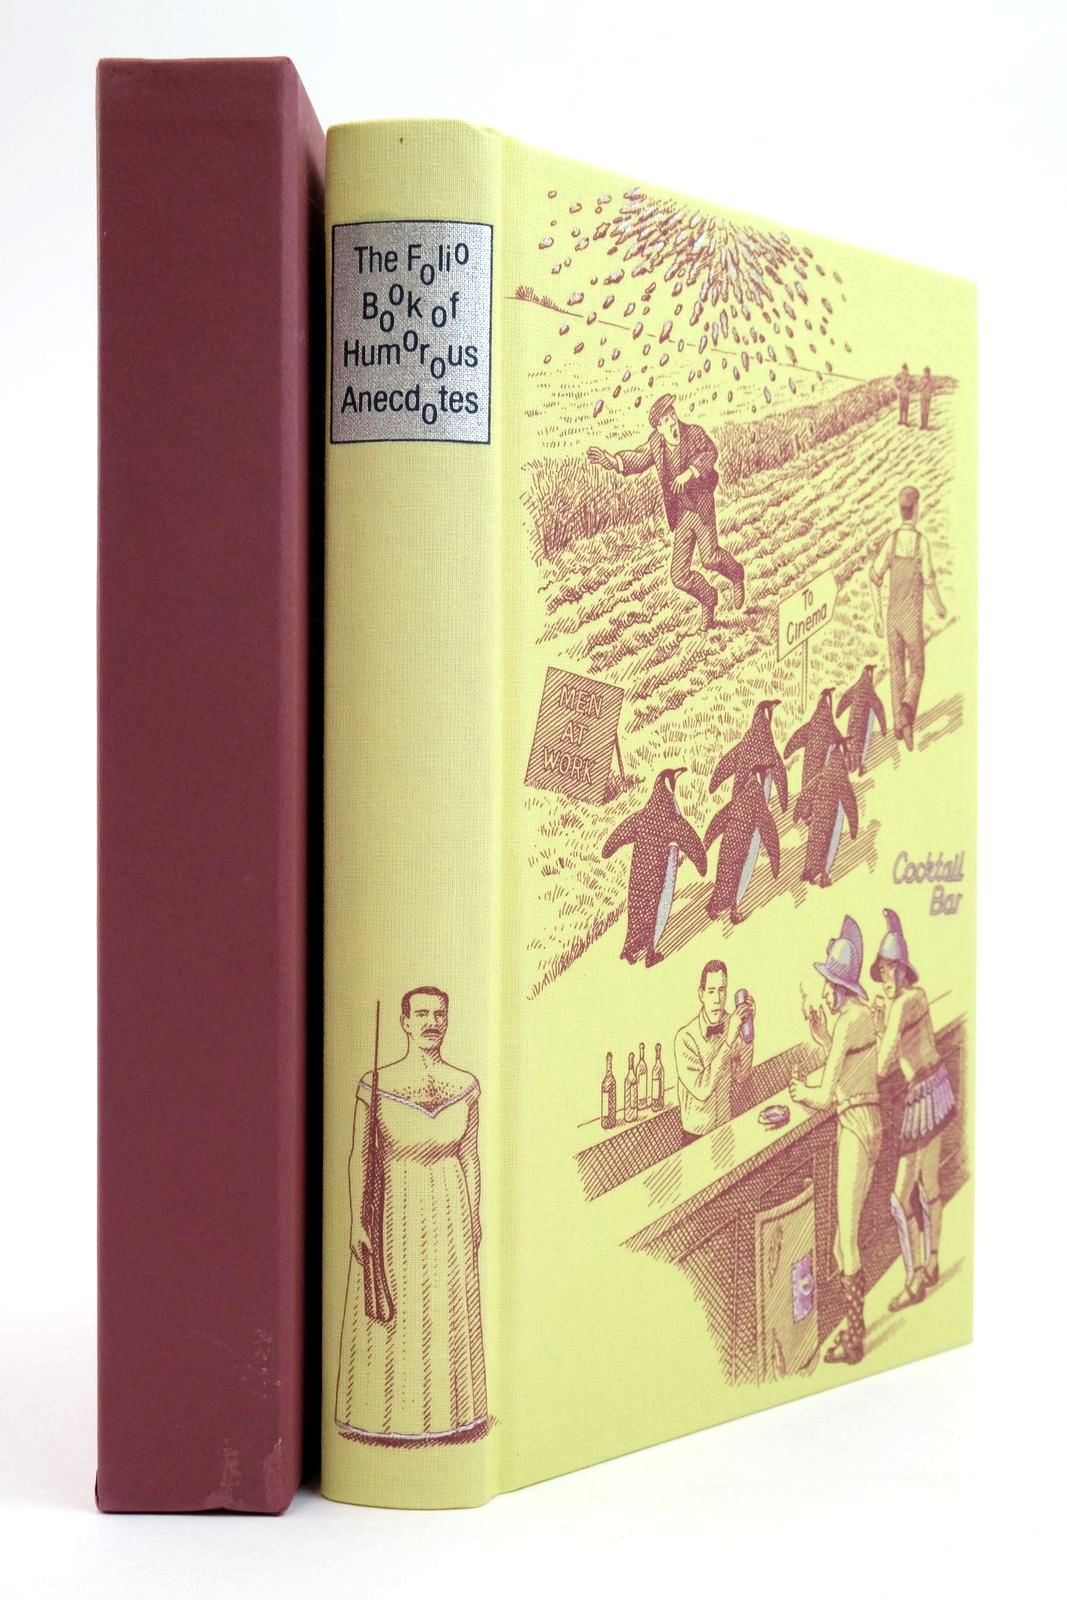 Photo of THE FOLIO BOOK OF HUMOROUS ANECDOTES written by Leeson, Edward illustrated by Hardcastle, Nick published by Folio Society (STOCK CODE: 2138423)  for sale by Stella & Rose's Books